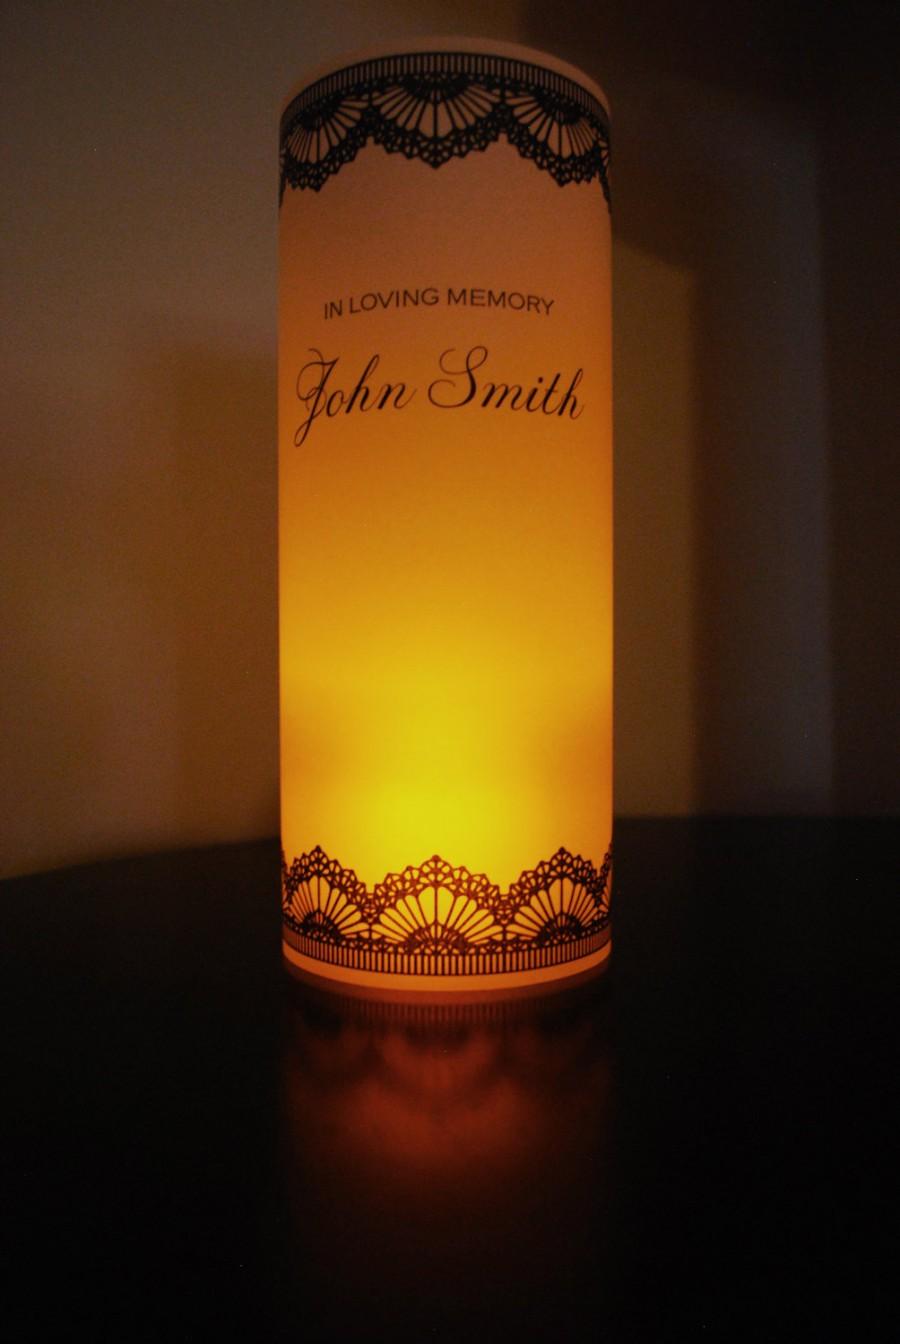 Wedding - In Loving Memory Vellum Paper Luminary - Memorial Remembrance LED Candle Luminaries Wedding Honor Loved One Mom Dad Grandparents Aunt Uncle